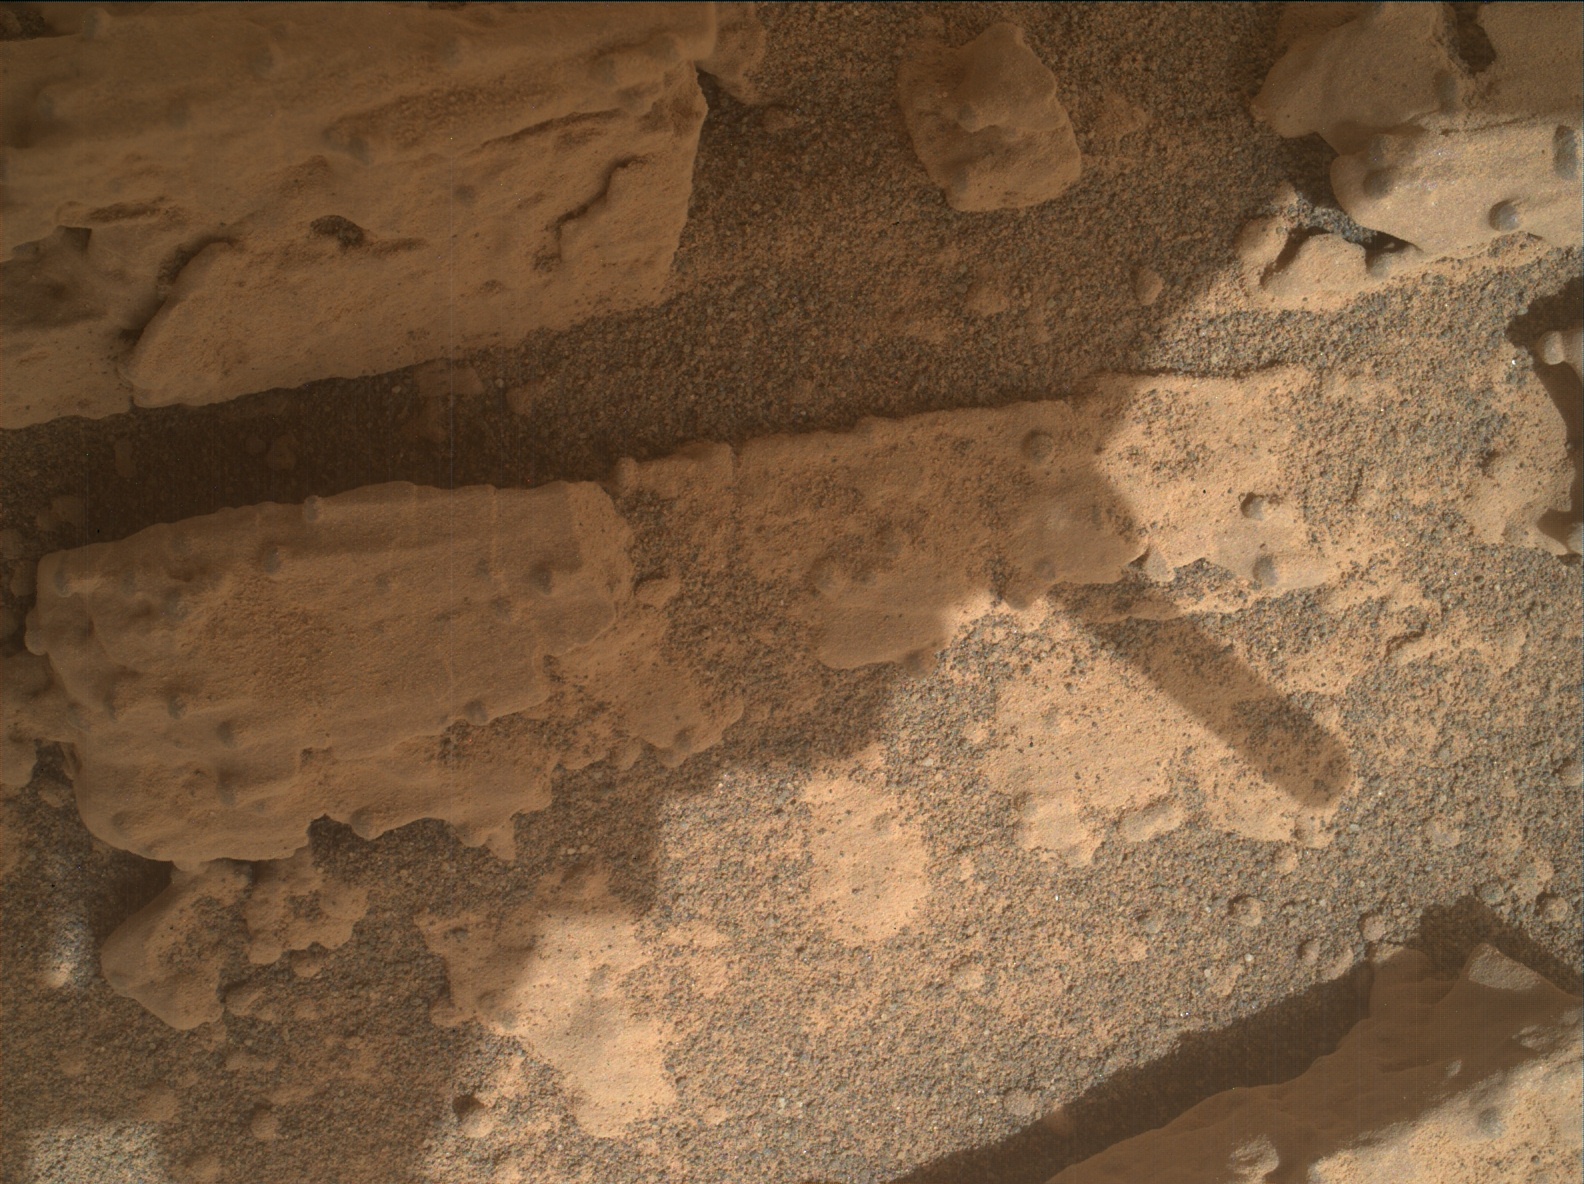 Nasa's Mars rover Curiosity acquired this image using its Mars Hand Lens Imager (MAHLI) on Sol 3469